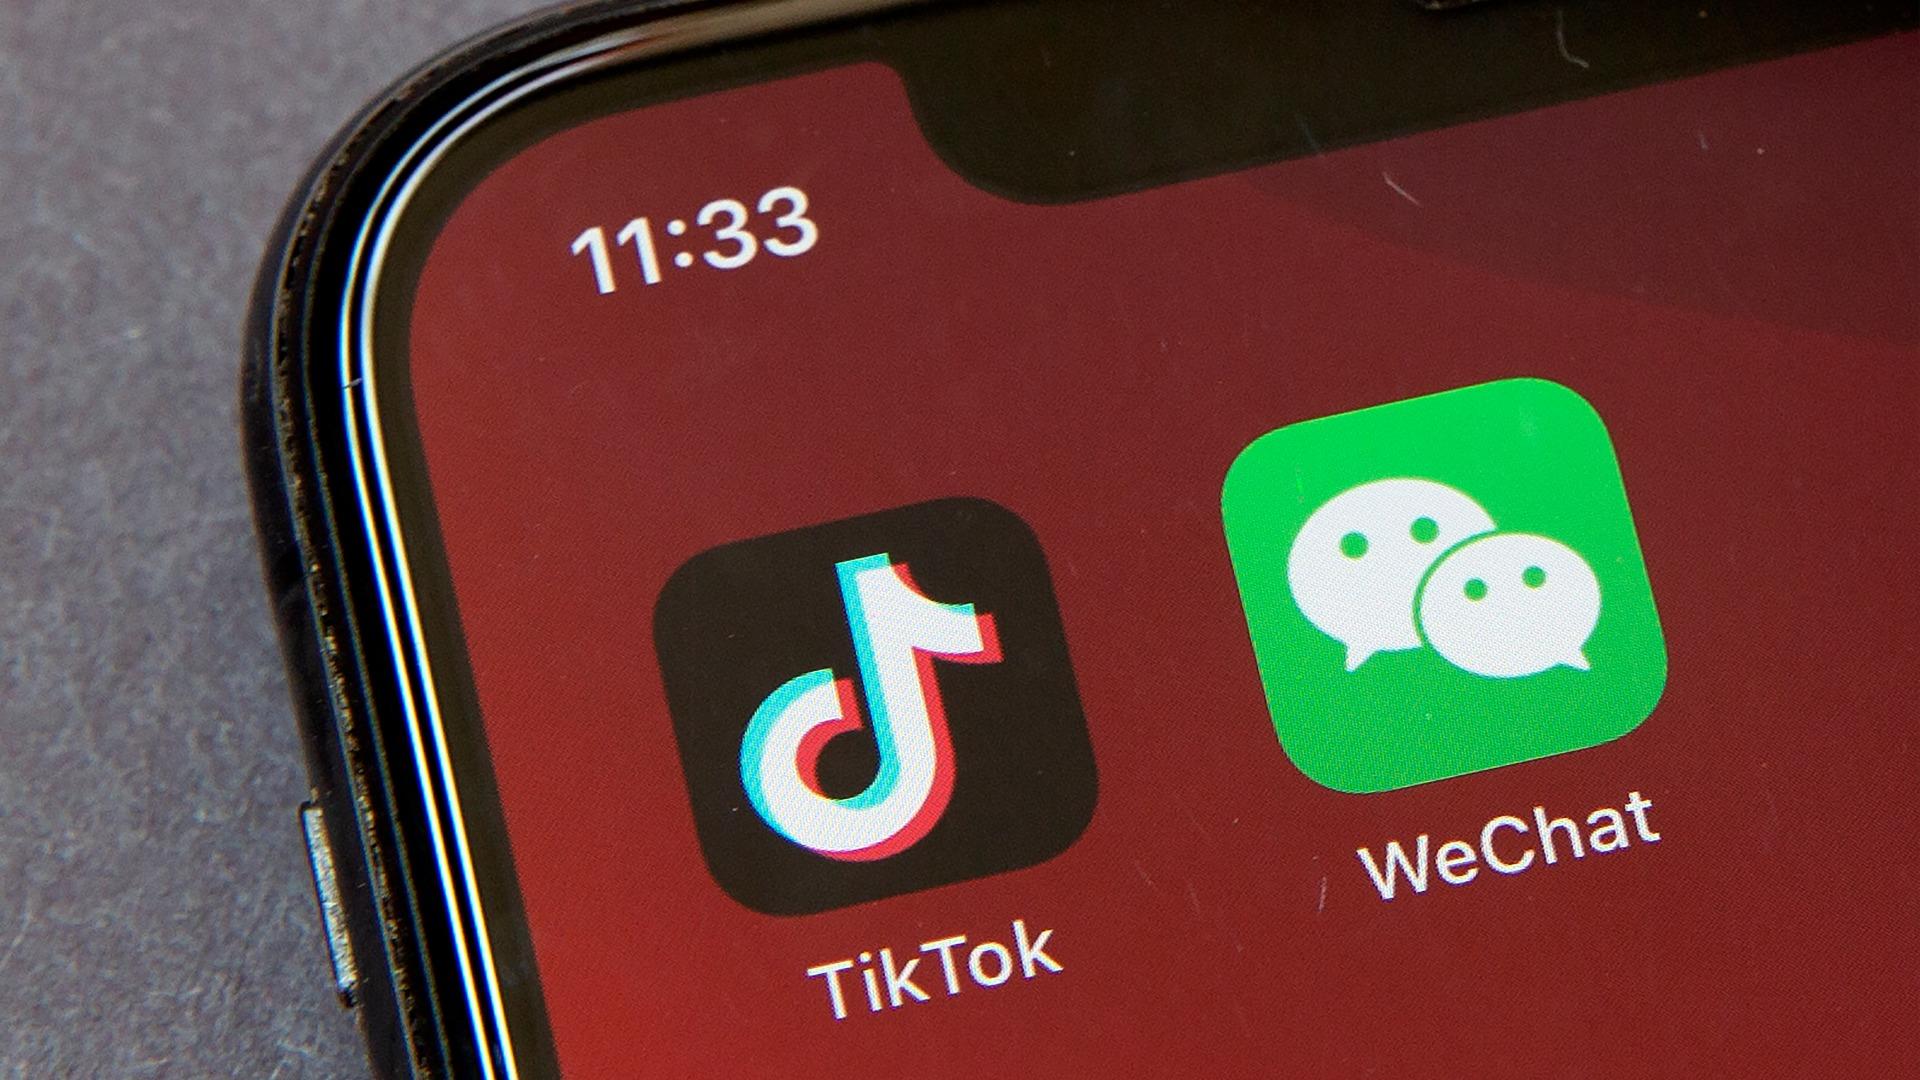 Icons for the smartphone apps TikTok and WeChat are seen on a smartphone screen in Beijing, in a Friday, Aug. 7, 2020 file photo. (AP Photo / Mark Schiefelbein, File)